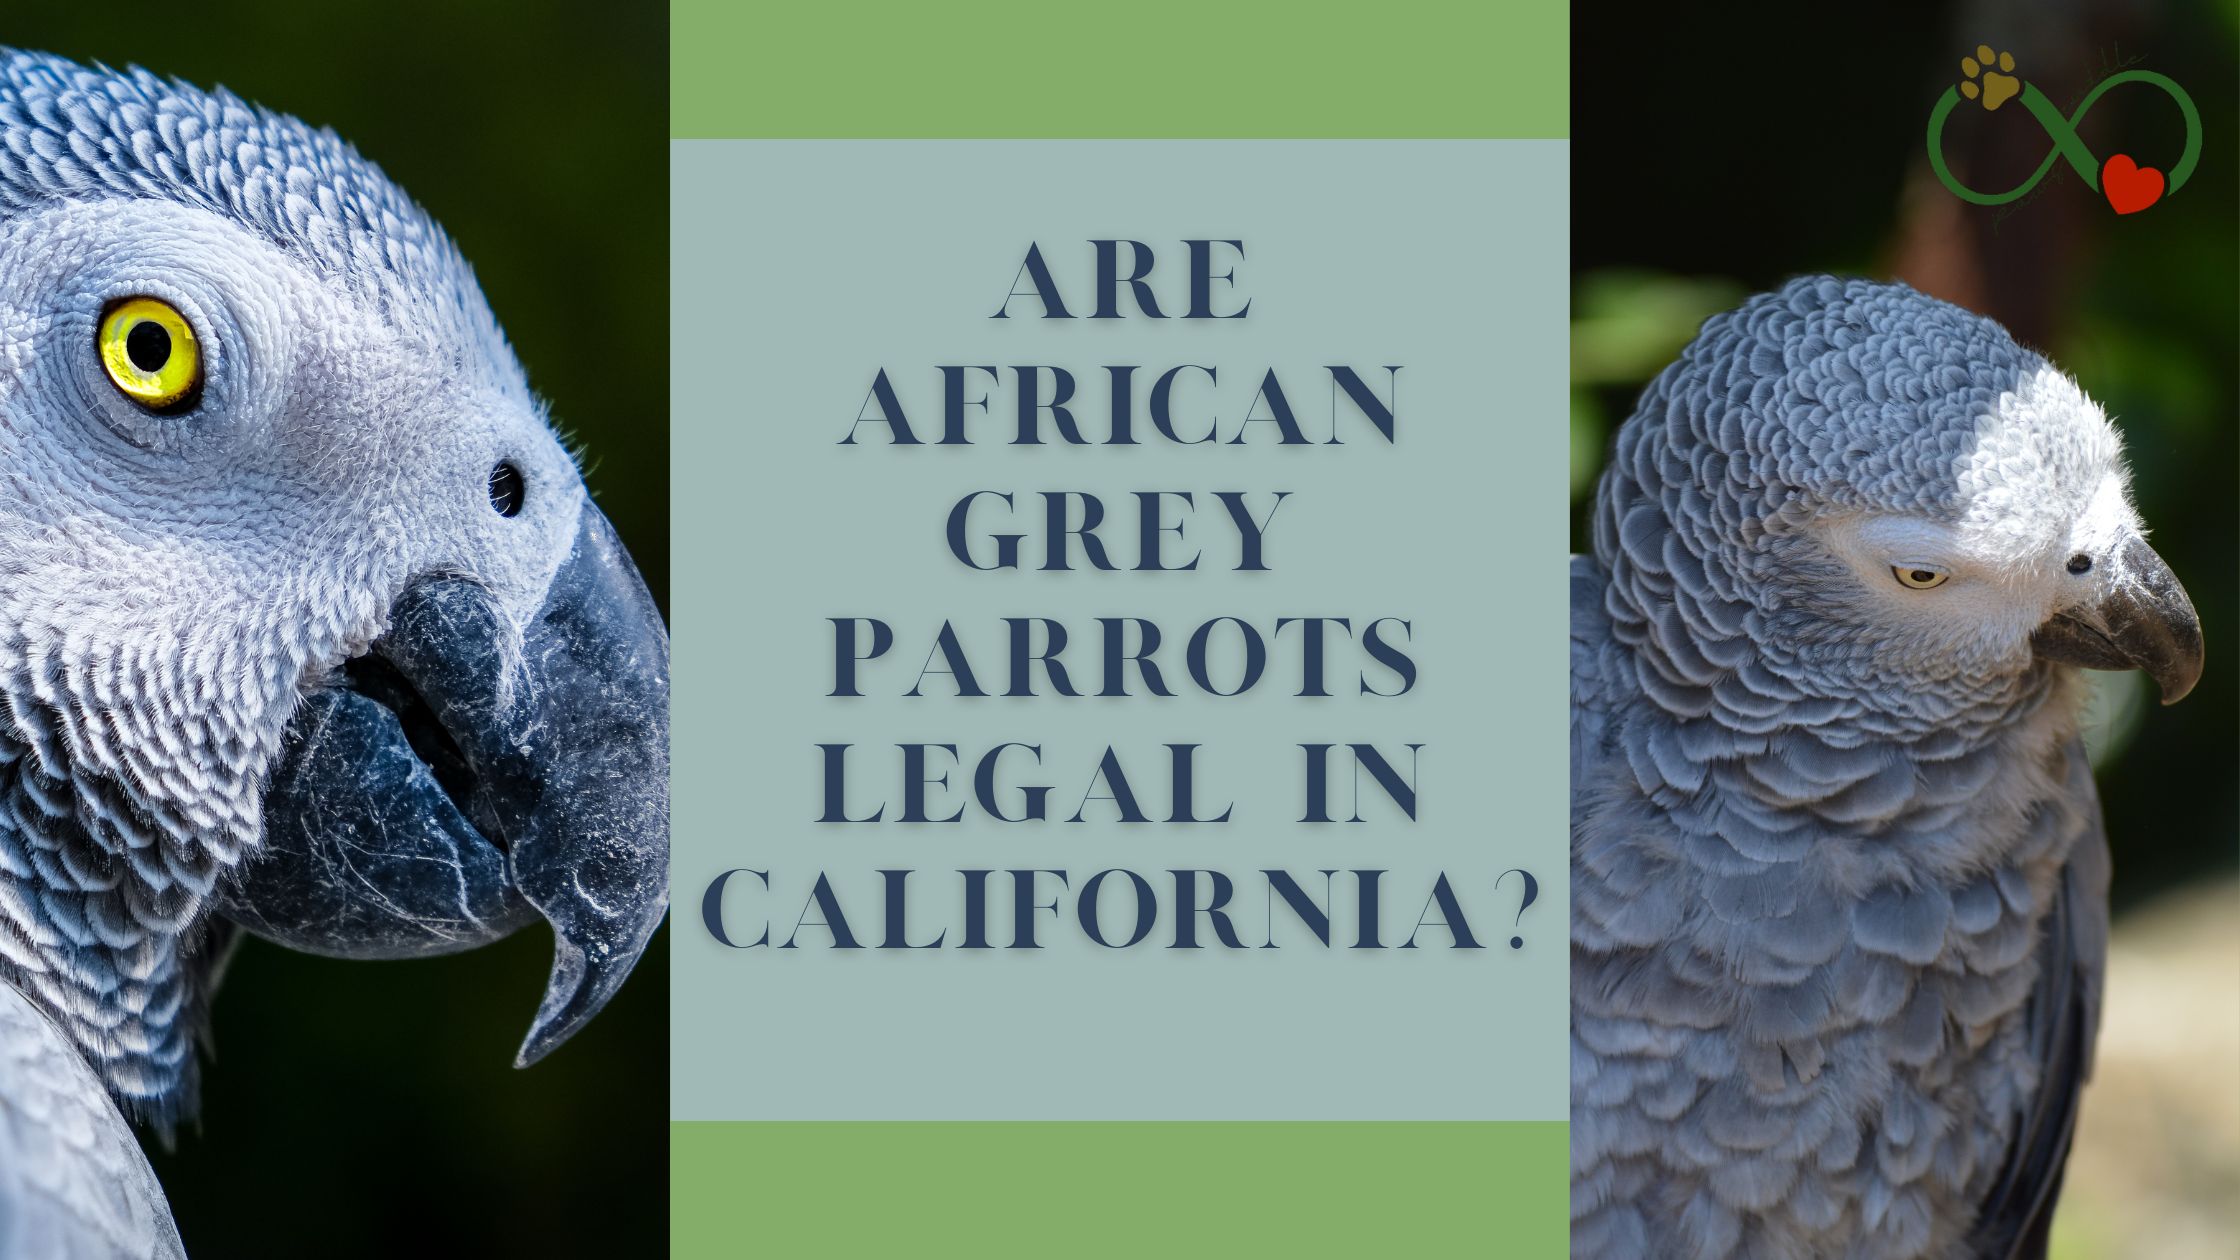 Are African grey parrots legal in California?